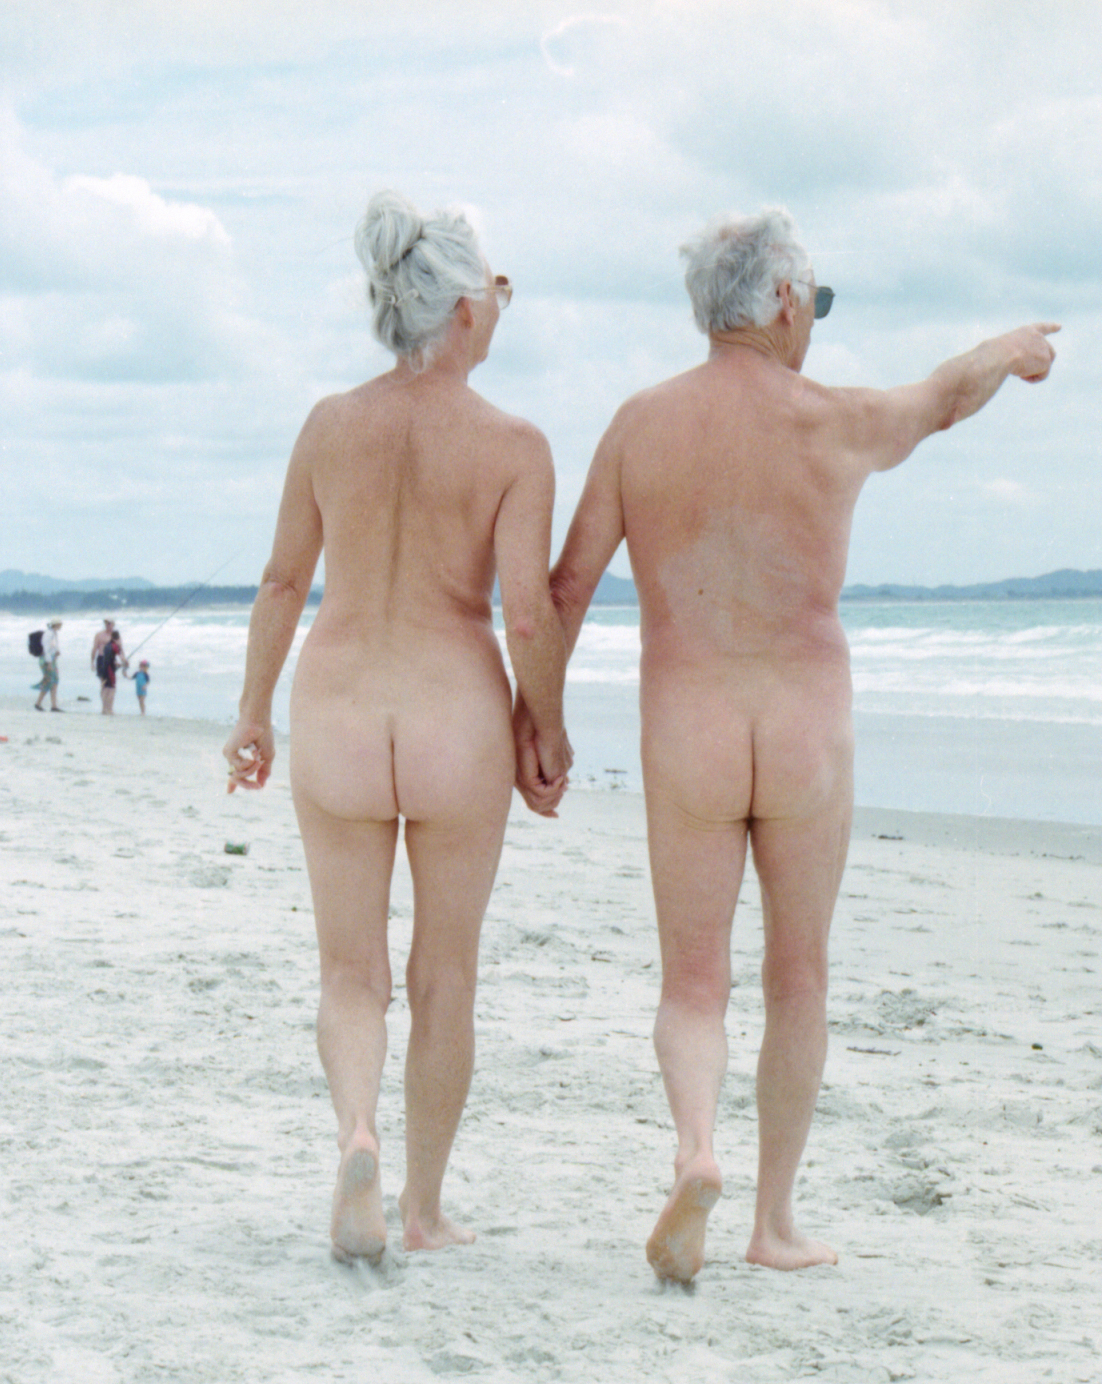 All Ages Topless Beach - Topless sunbathing on New Zealand beaches: The law and what we really think  - NZ Herald